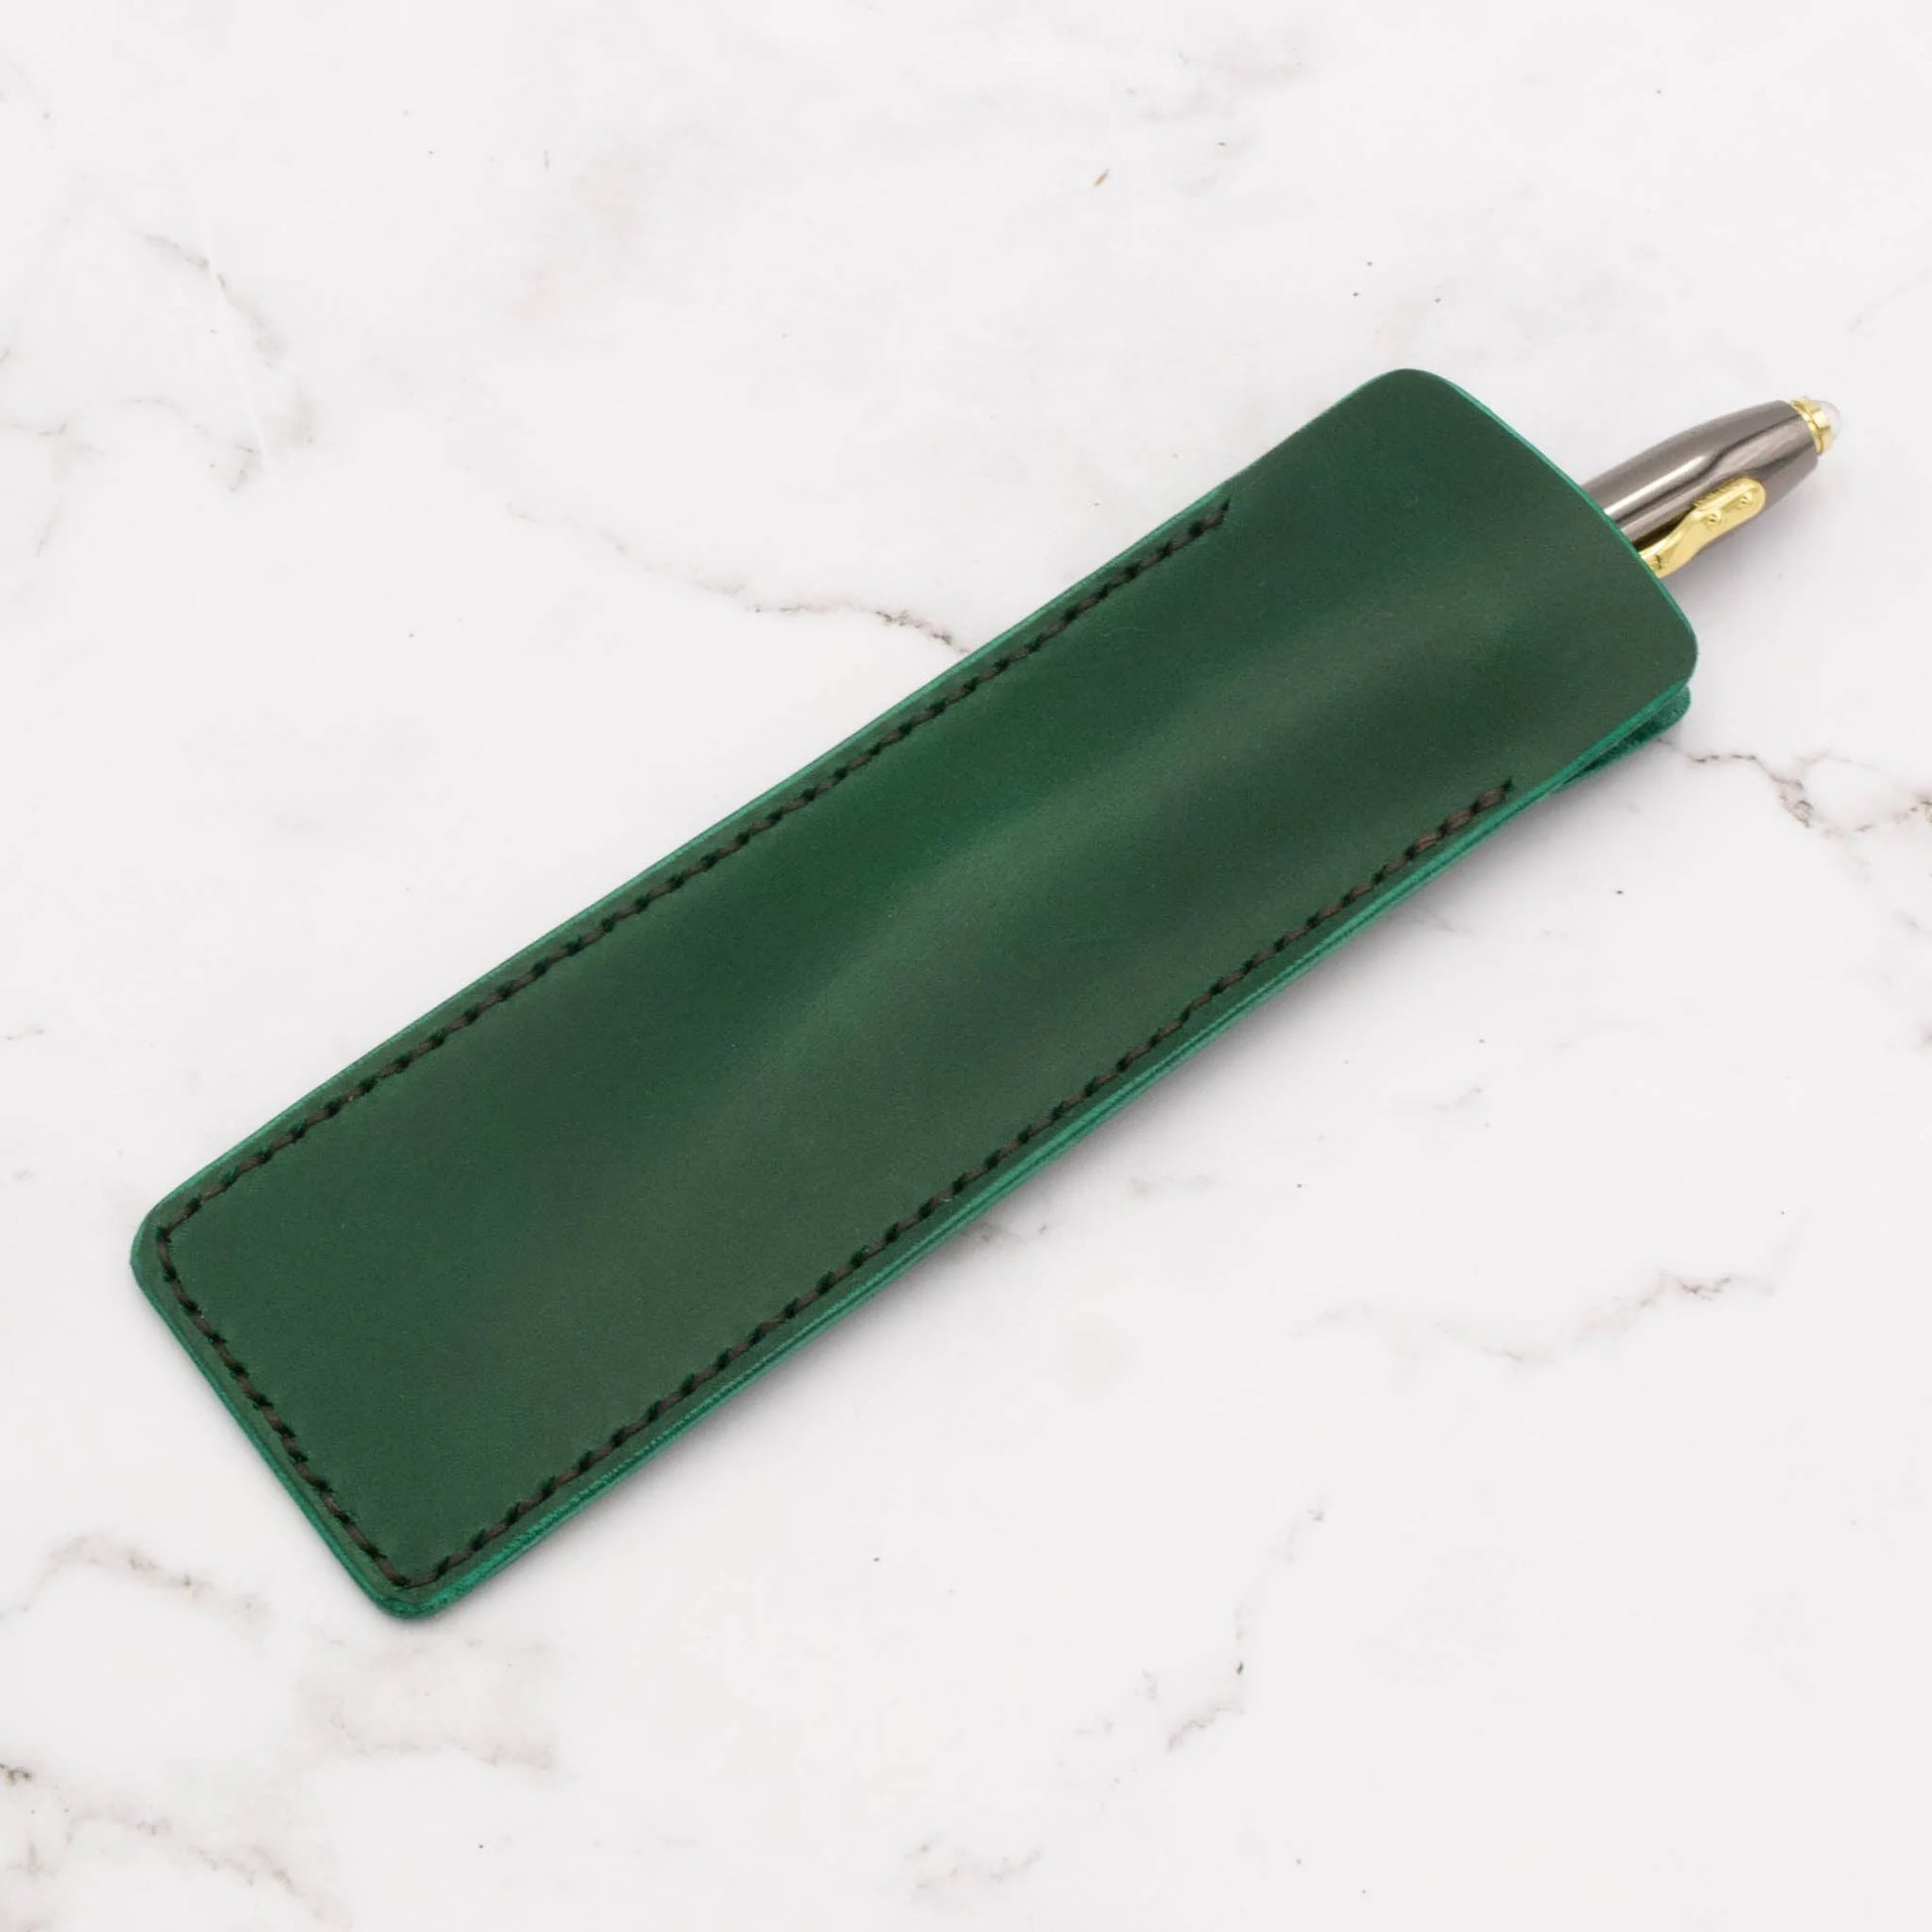 Cheekoo's Handcrafted Leather Pen Case